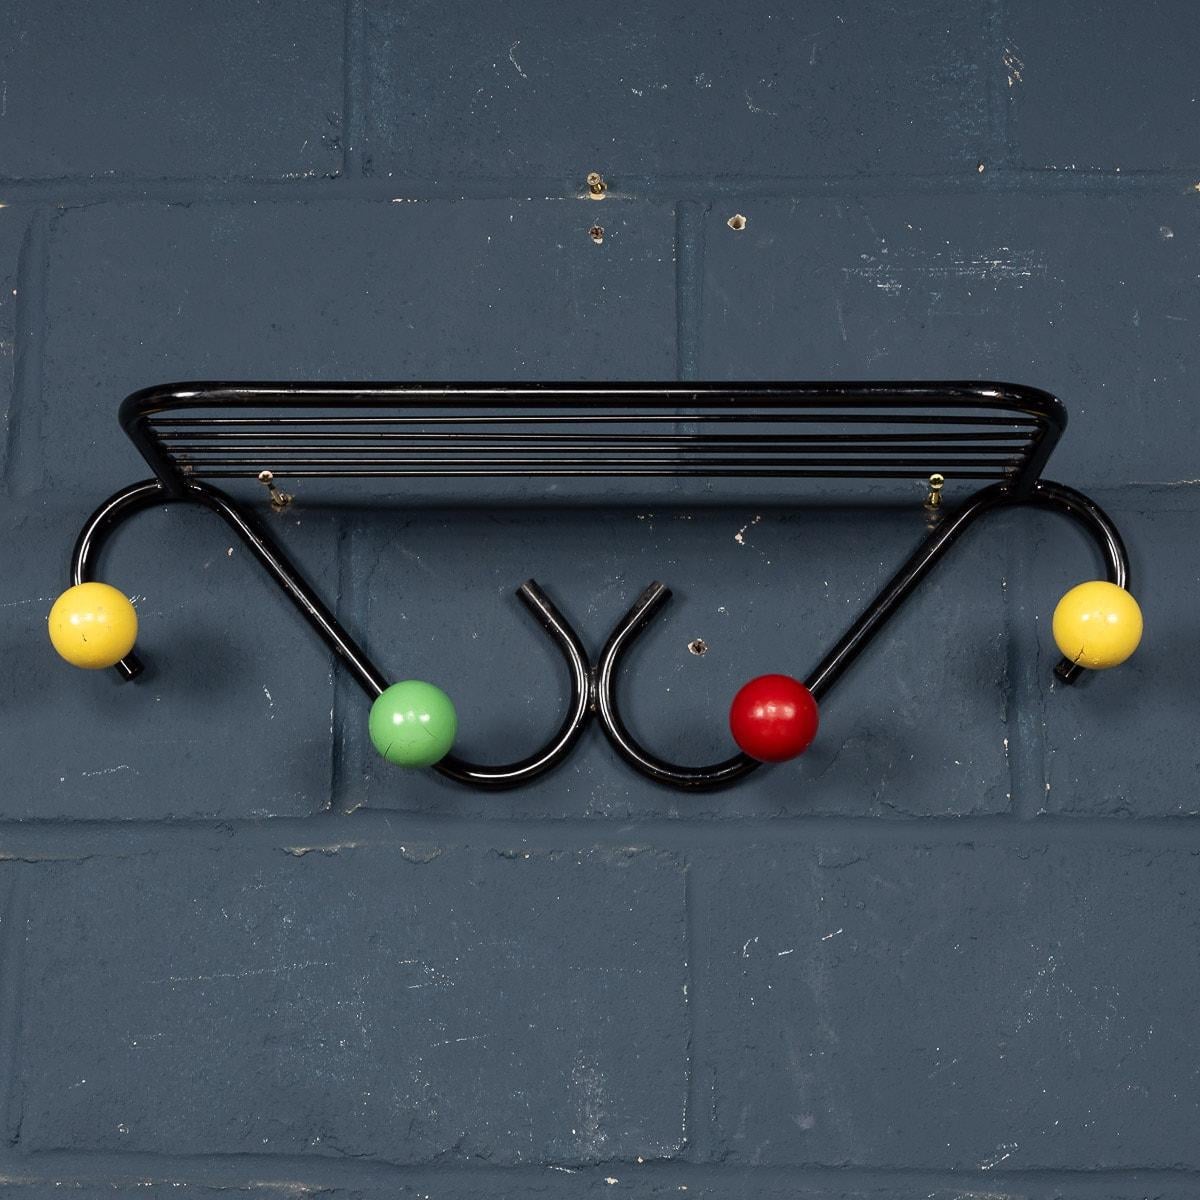 The stand created to carry hats and coats, with the typical solid multicoloured wood balls to the ends. The wood balls still bear the original paintwork and although there are obvious signs of wear and tear consistent with normal domestic use, it